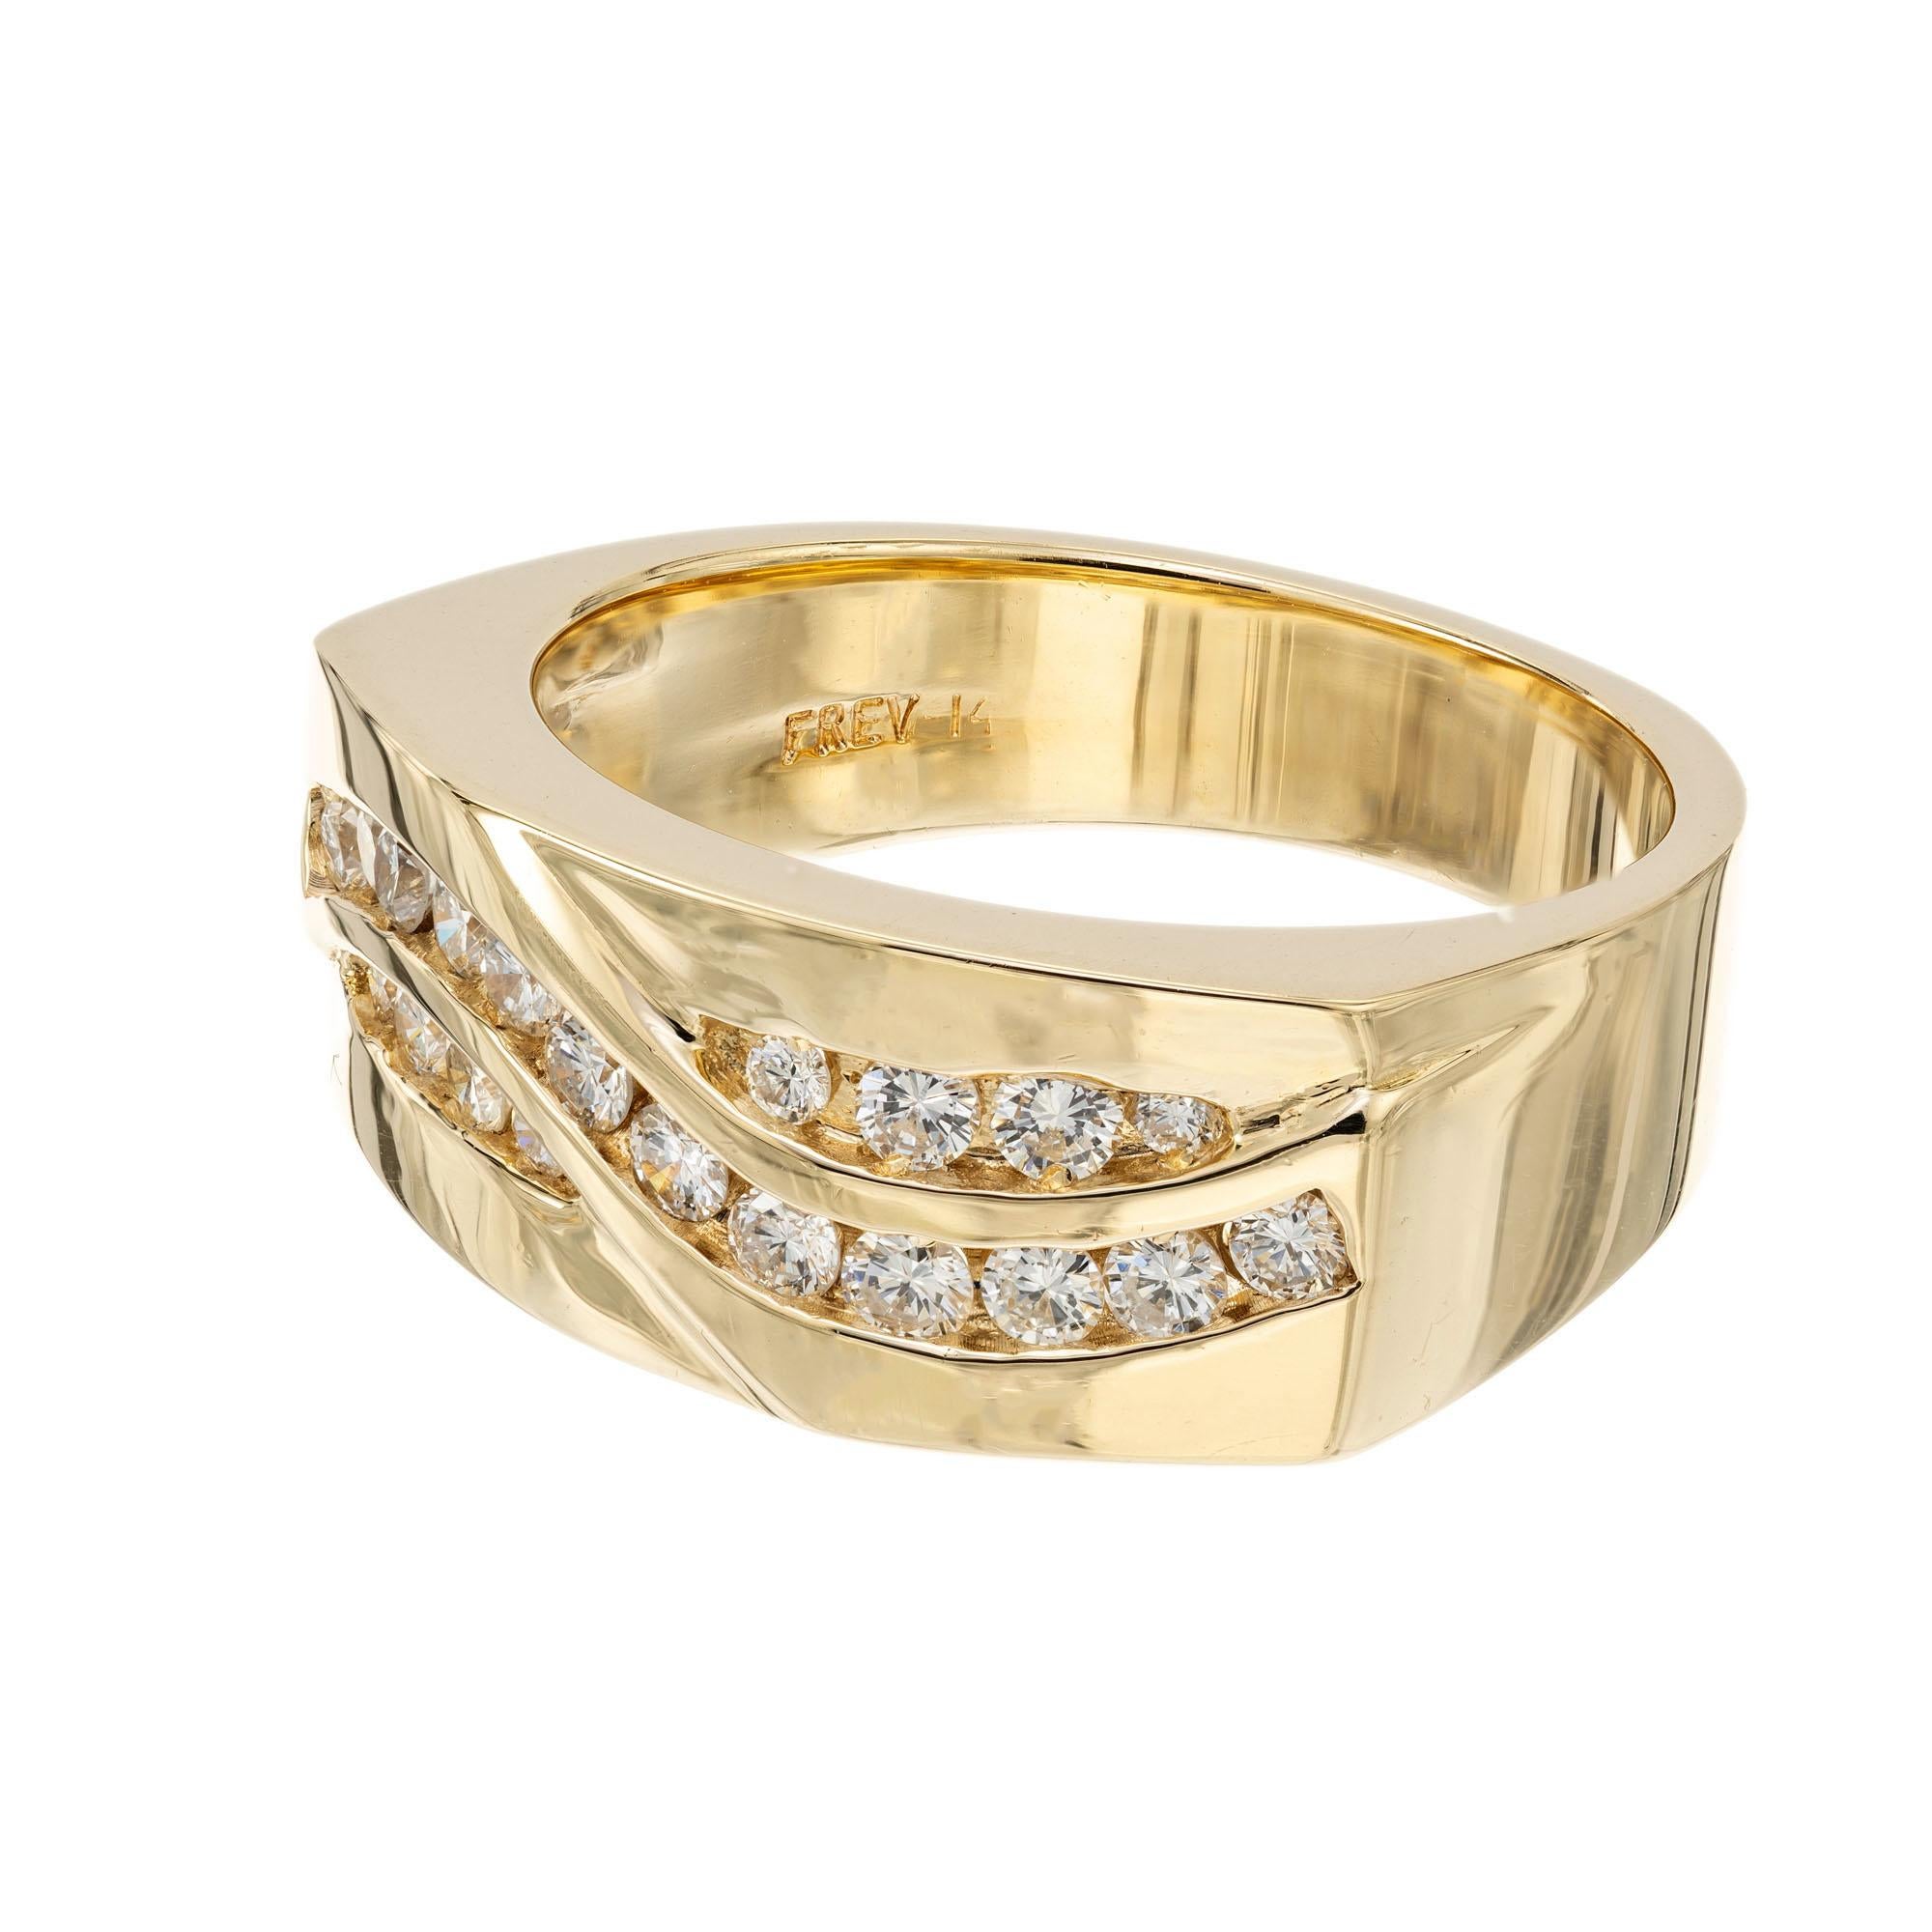 Domed flat top 14k yellow gold band ring set with 20 round brilliant cut diamonds.  

20 round brilliant cut diamonds, H-I VS approx. .60cts
Size 8 and sizable
14k yellow gold 
Stamped: 14k
Hallmark: FREV
10.5 grams
Width at top: 8.7mm
Height at